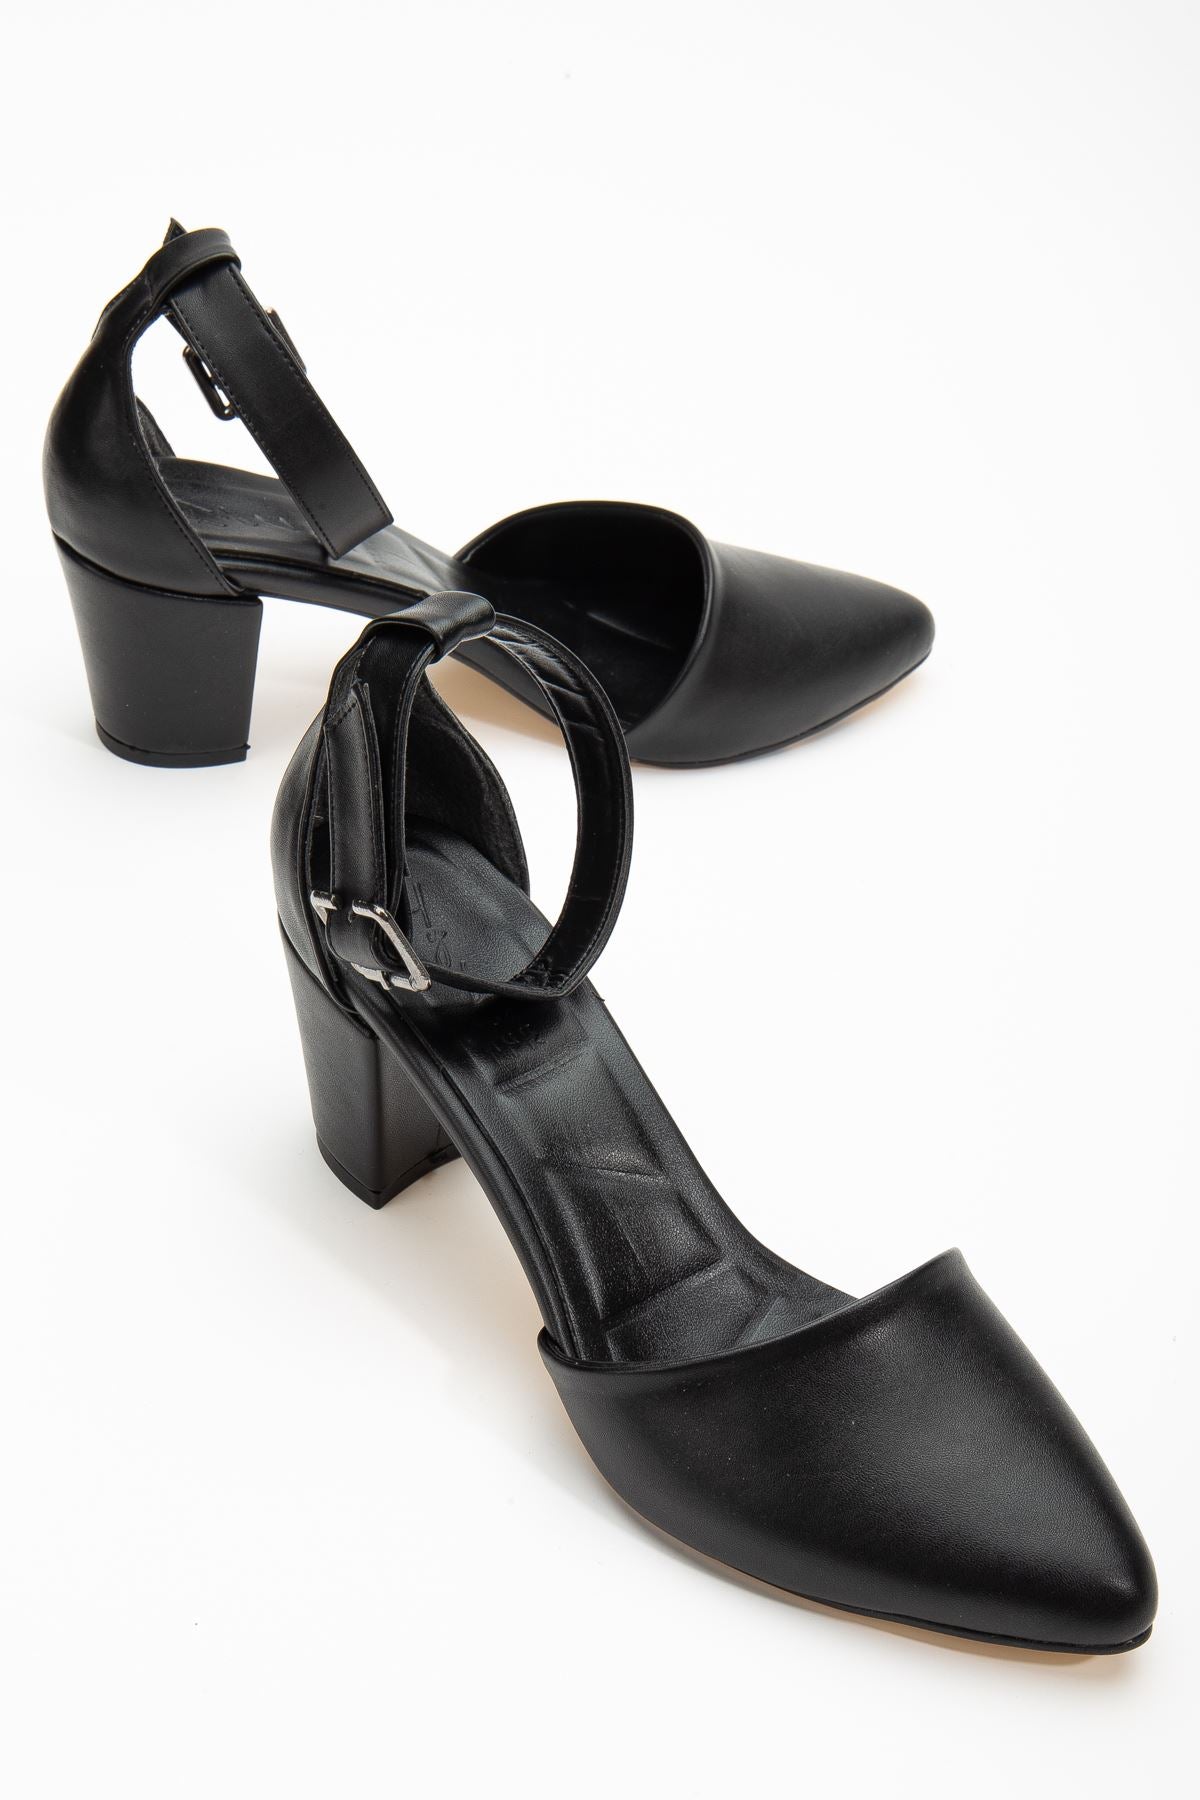 Lottis Black Leather Detailed Heeled Women's Shoes - STREETMODE ™